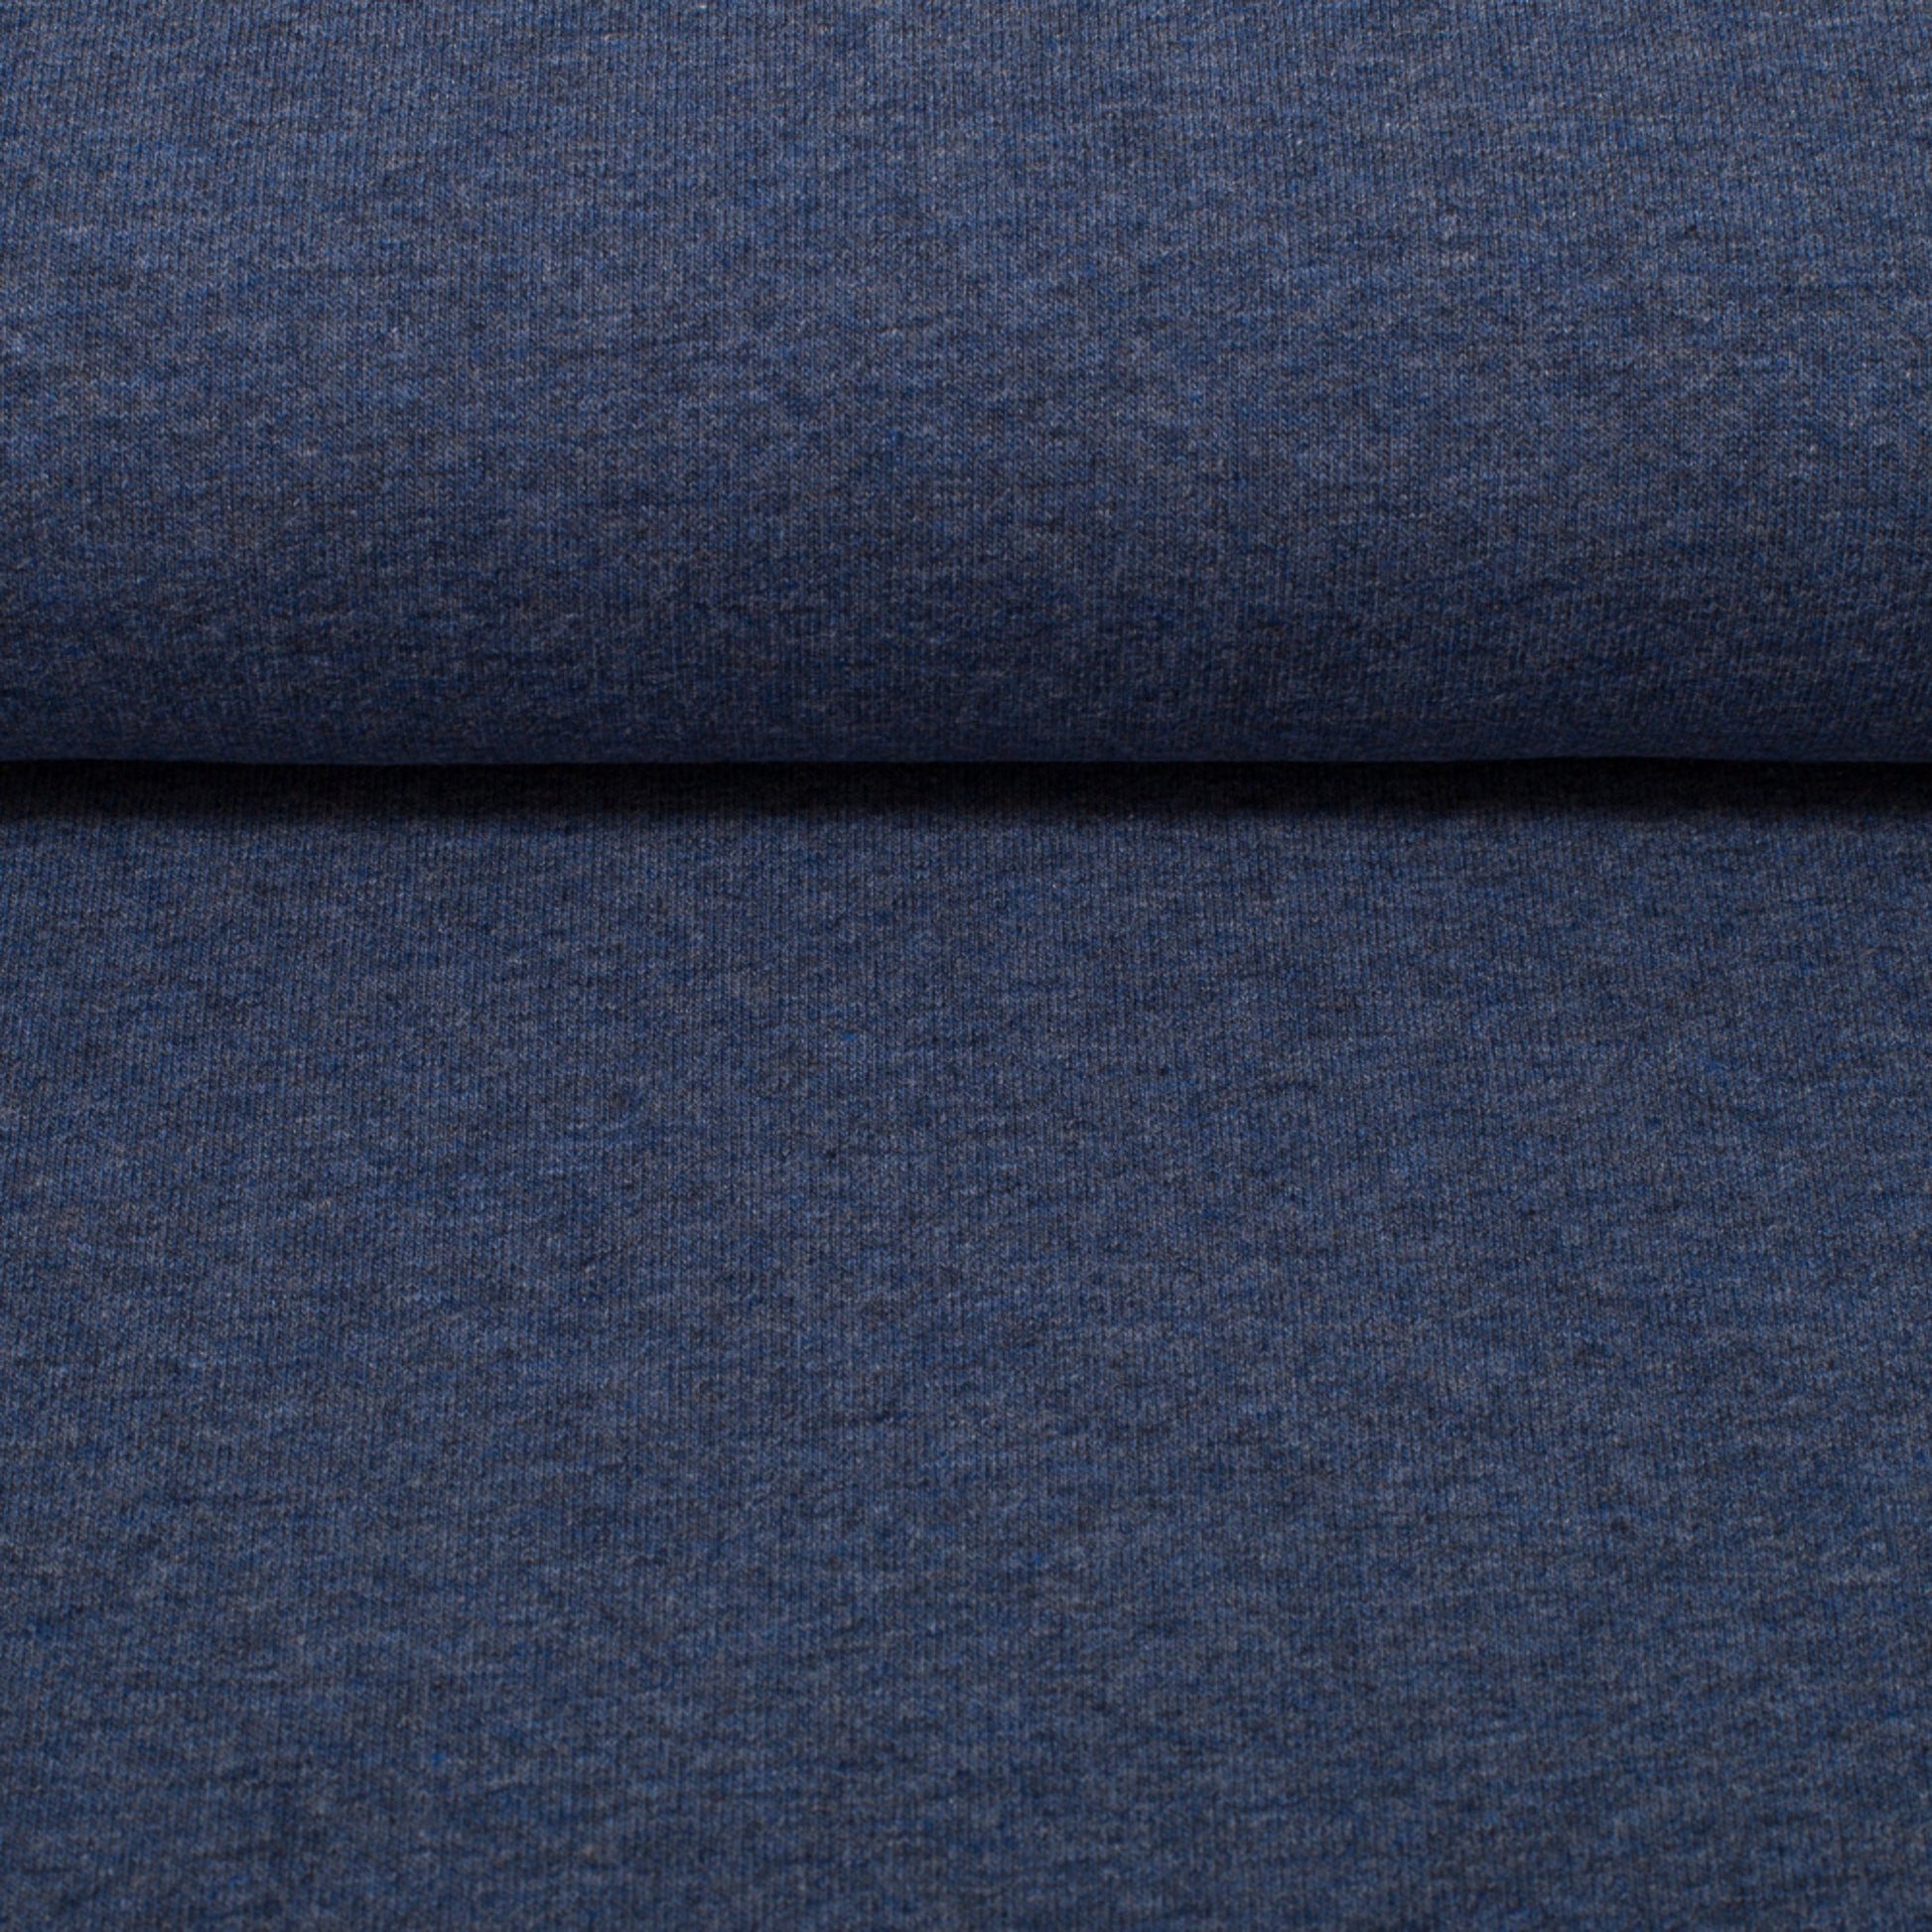 Swafing Melange - Dark Blue - Euro-ribbing - Jersey - French Terry - Fleeced French Terry - 1597 - Little Rhody Sewing Co.